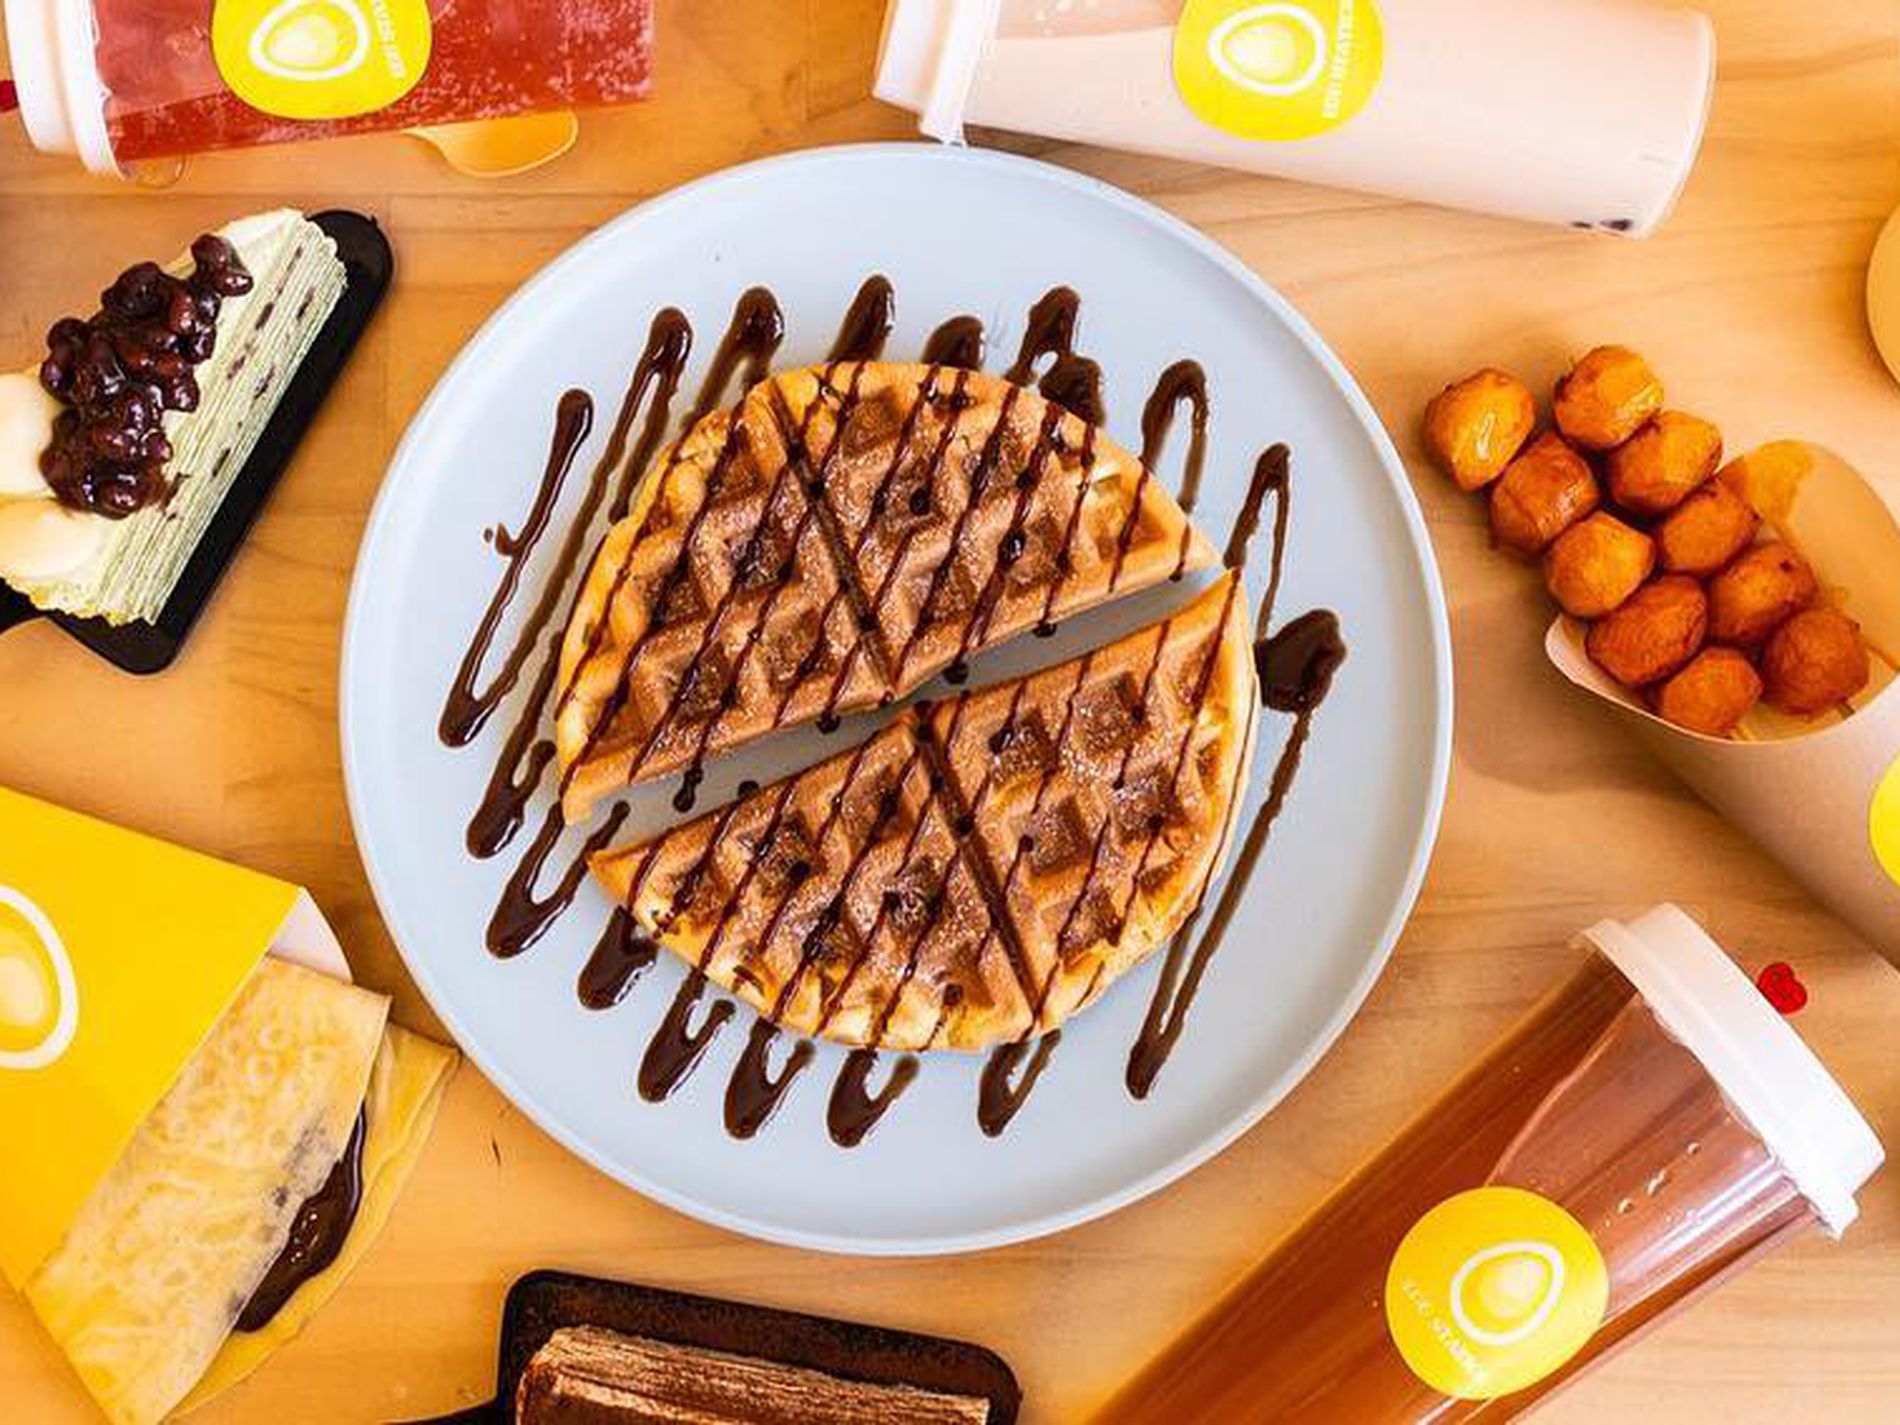 Ice Cream, Bubble Tea and Dessert Business for Sale South Yarra